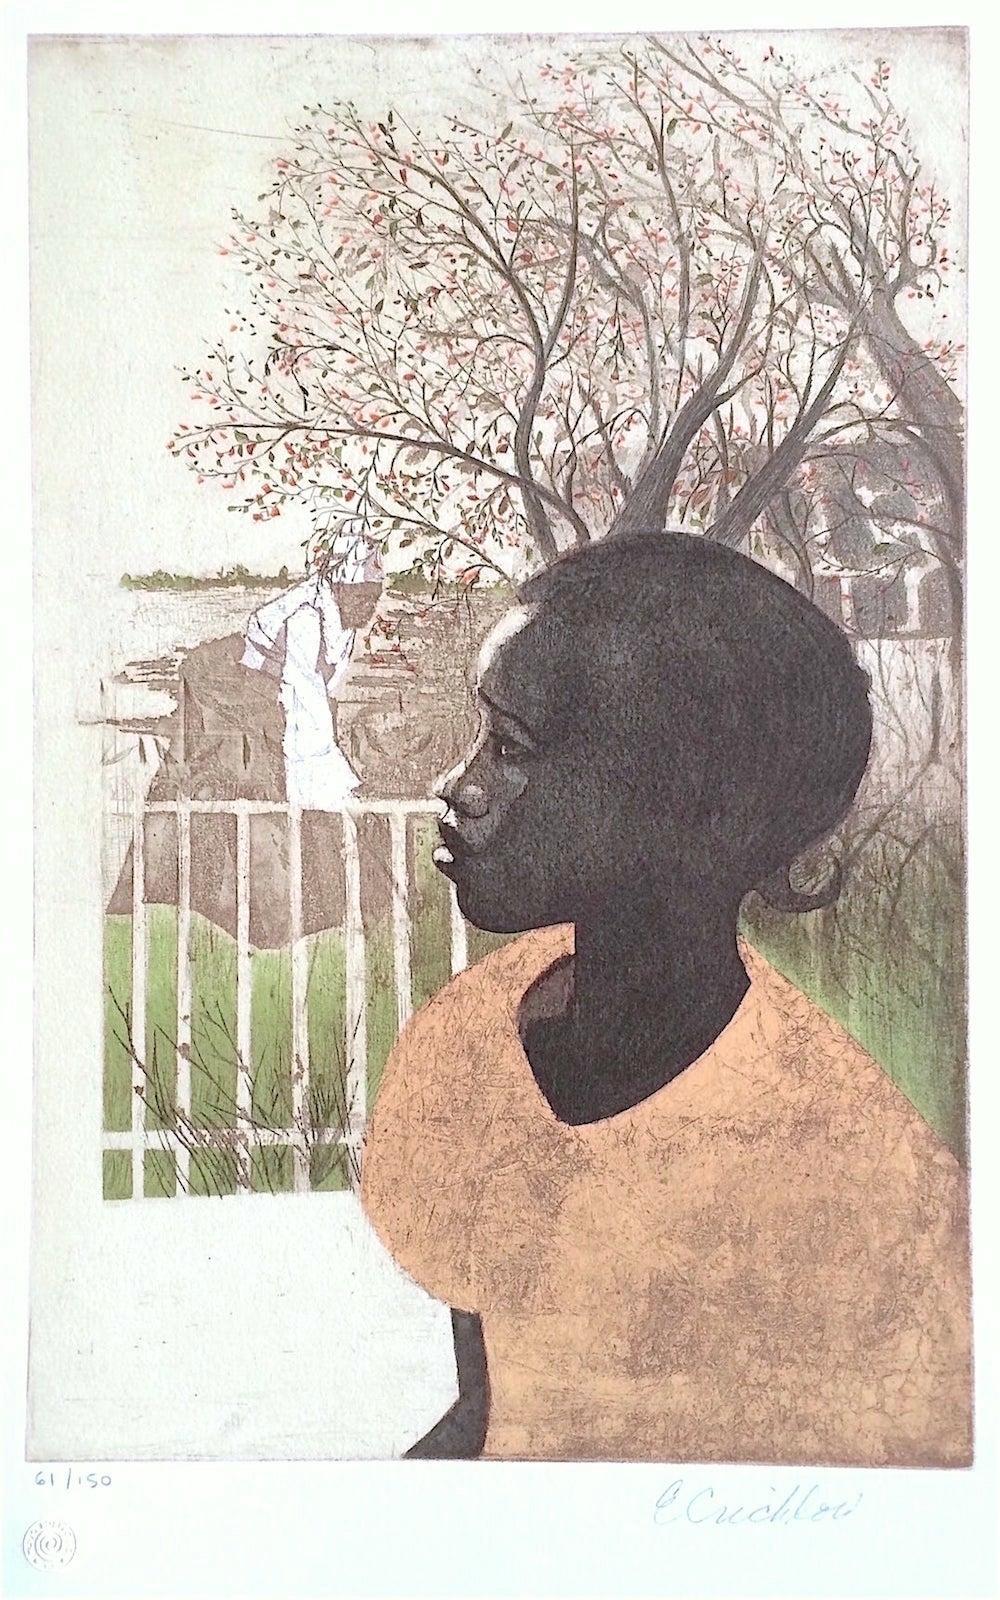 Ernest Crichlow Figurative Print - NEW DREAMS Signed Lithograph, Black History, African American Women